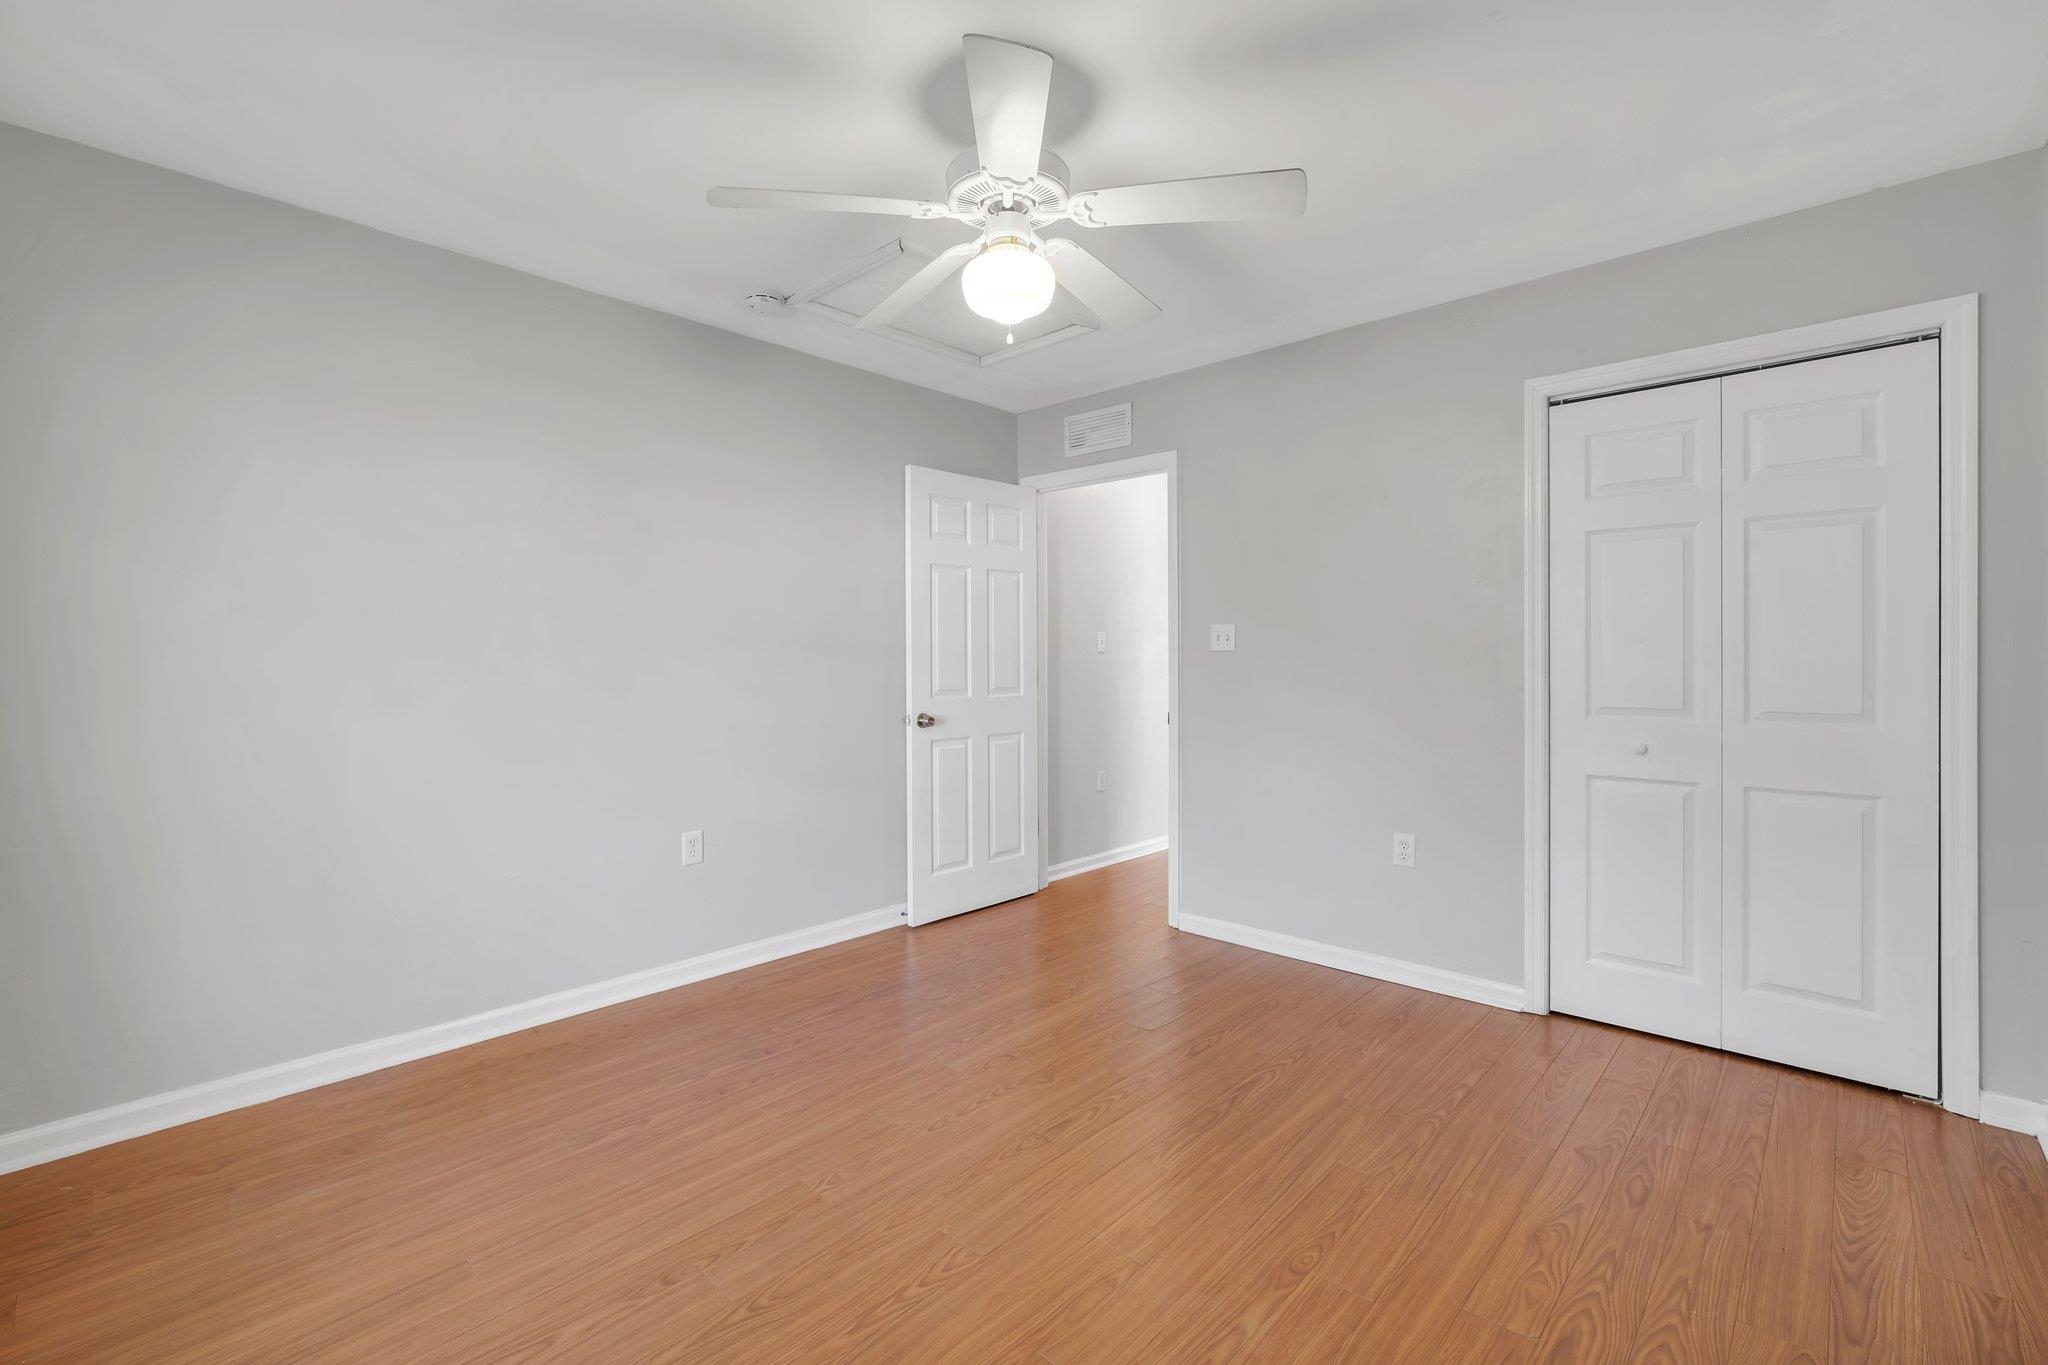 241 Dixie Drive,TALLAHASSEE,Florida 32304,3 Bedrooms Bedrooms,3 BathroomsBathrooms,Condo,241 Dixie Drive,369159